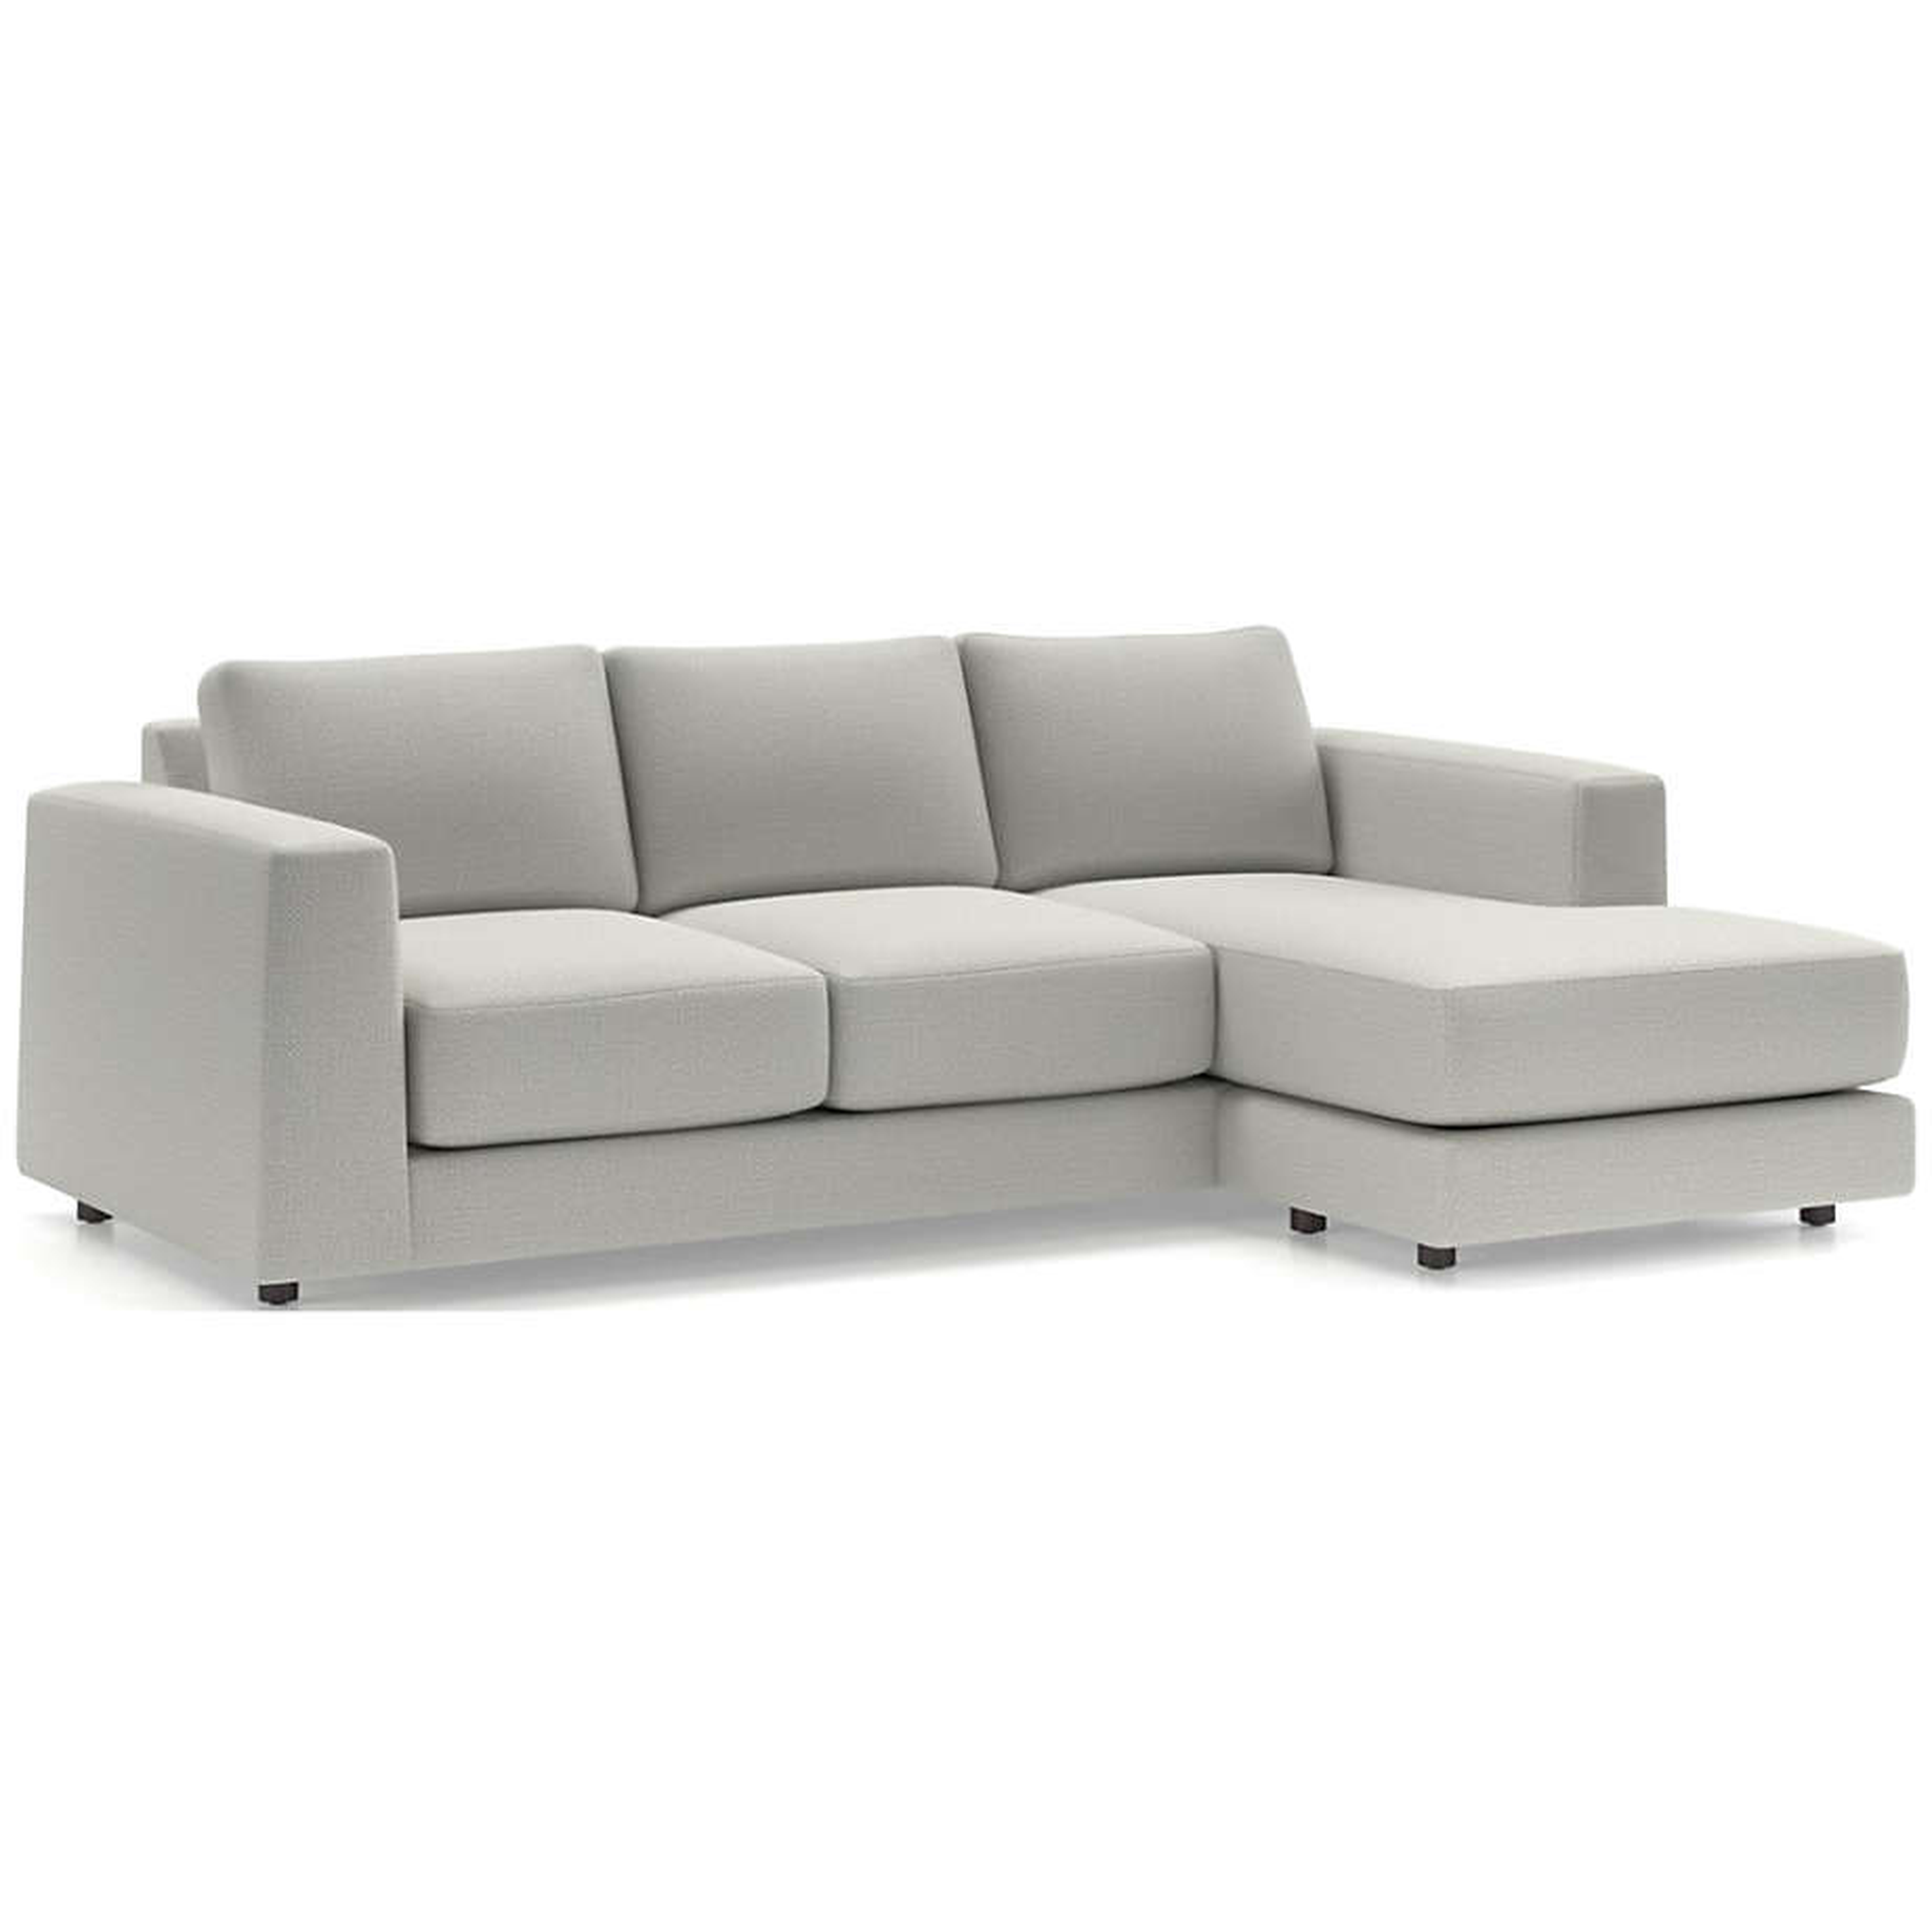 Peyton 3-Seat Reversible Sectional - Crate and Barrel